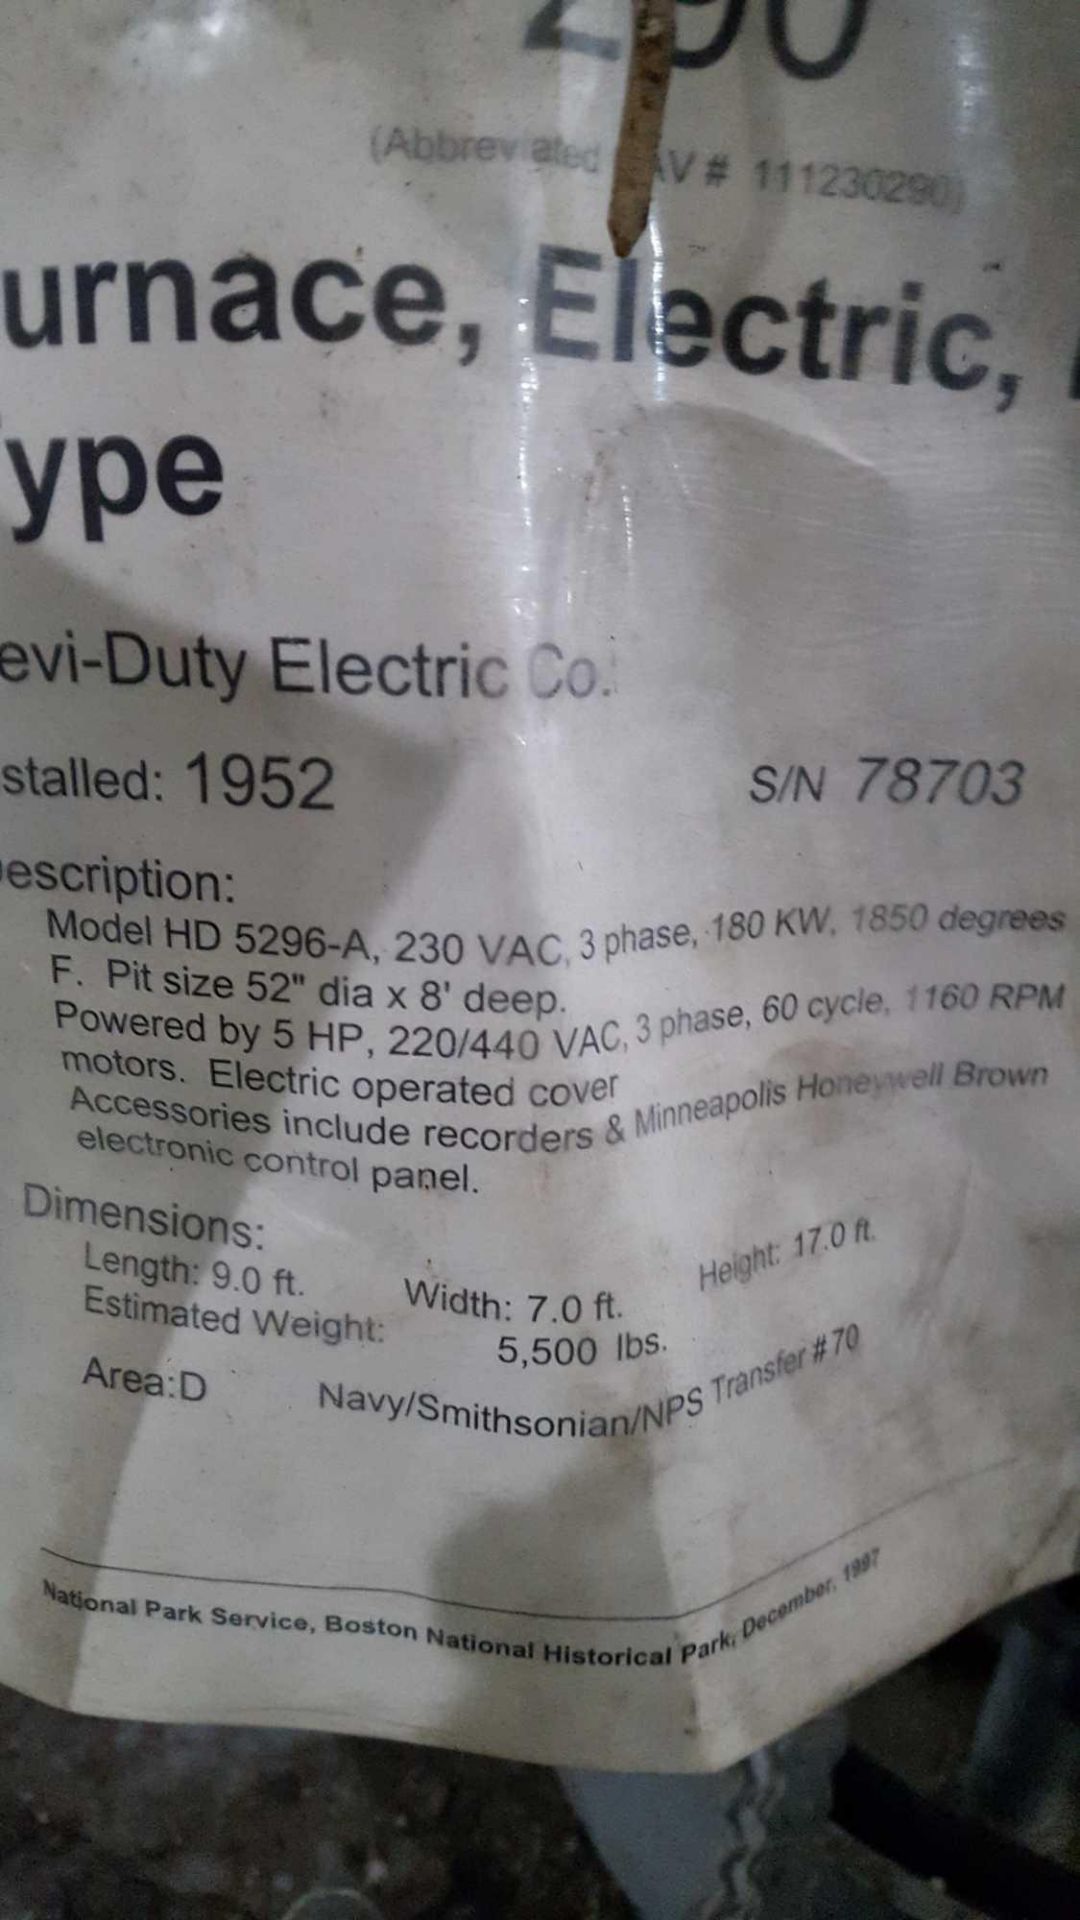 Heavy duty Electric Company electric furnace serial number 78703 Kama model HD 5296 - A, 2304 A - Image 3 of 3